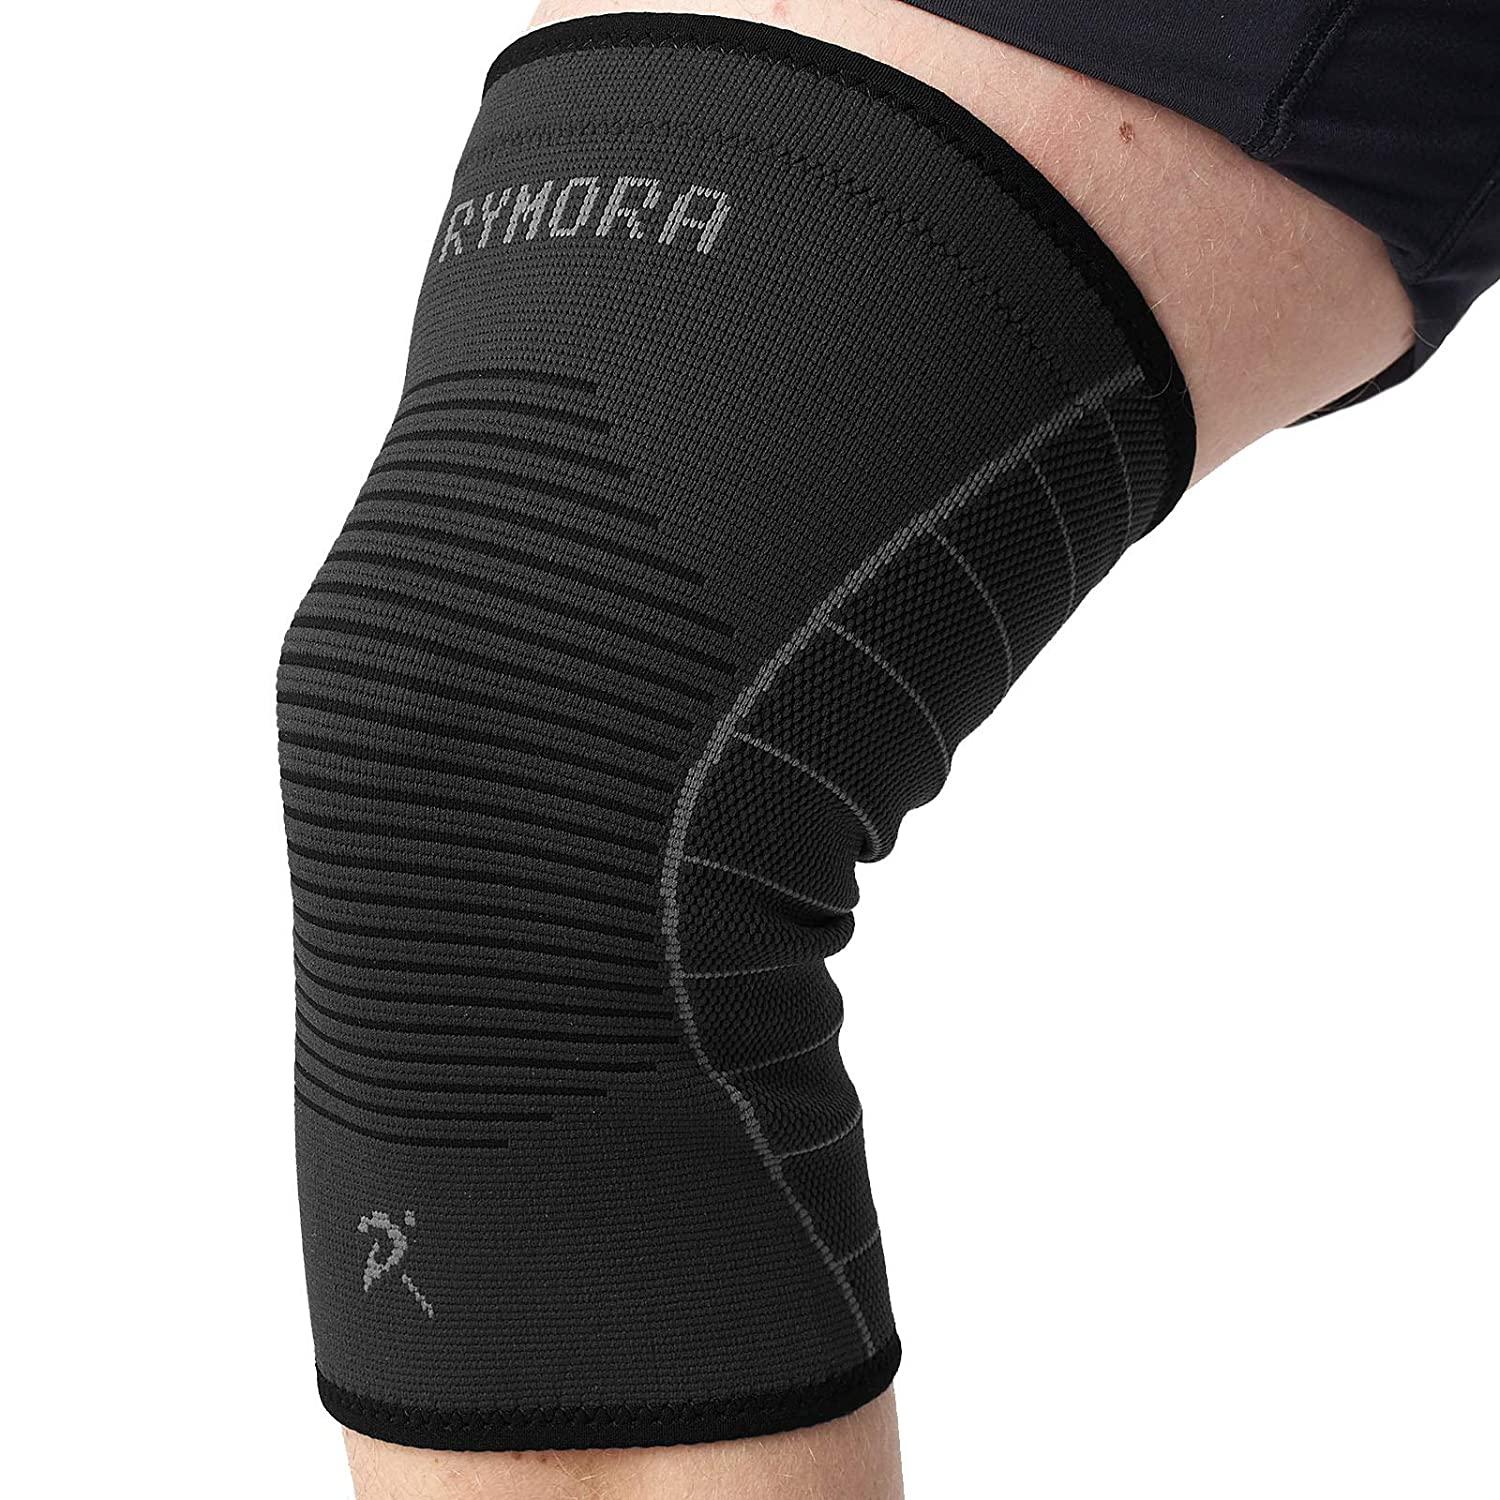 Knee Compression Sleeve Brace Support For Gym Joint Pain Arthritis Relief UK 